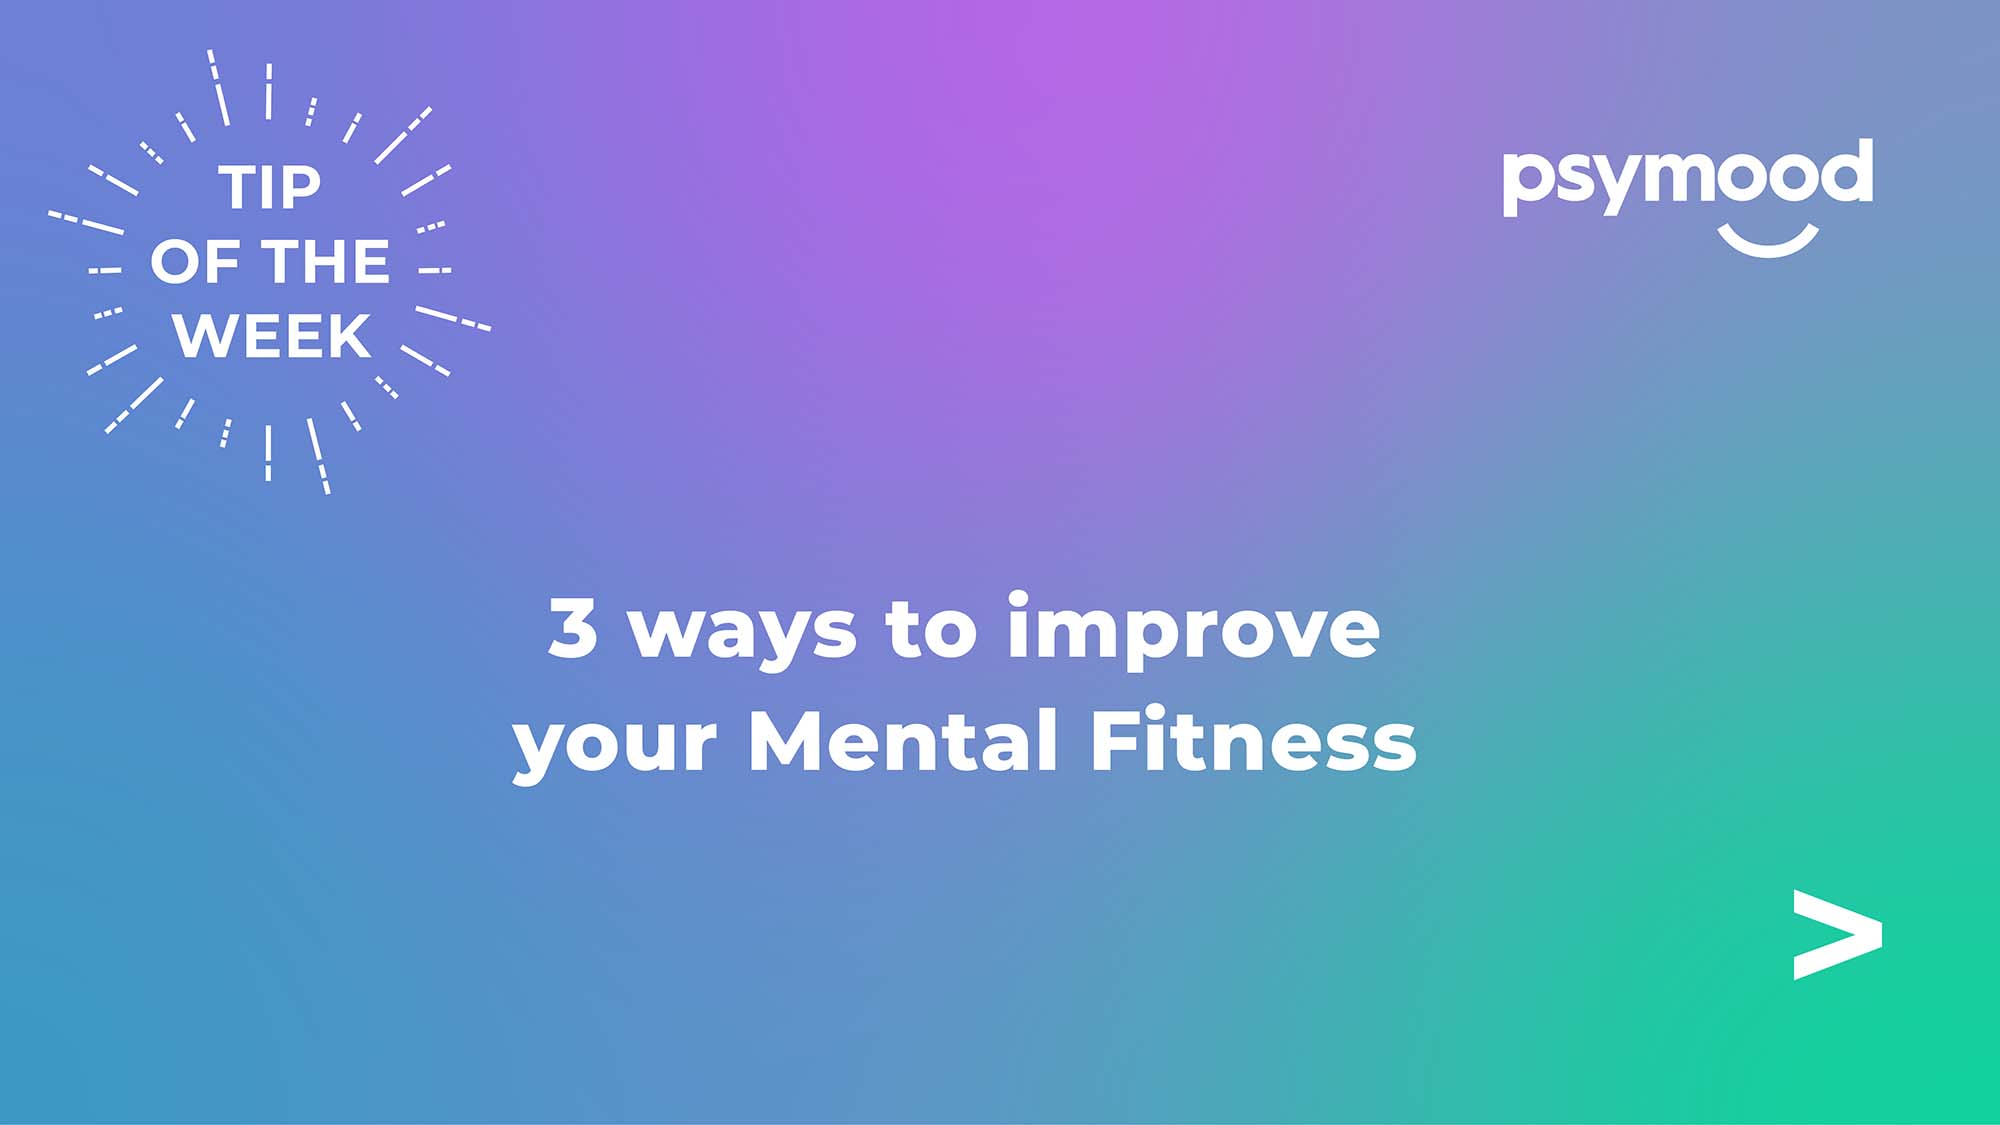 3 ways to improve your Mental Fitness